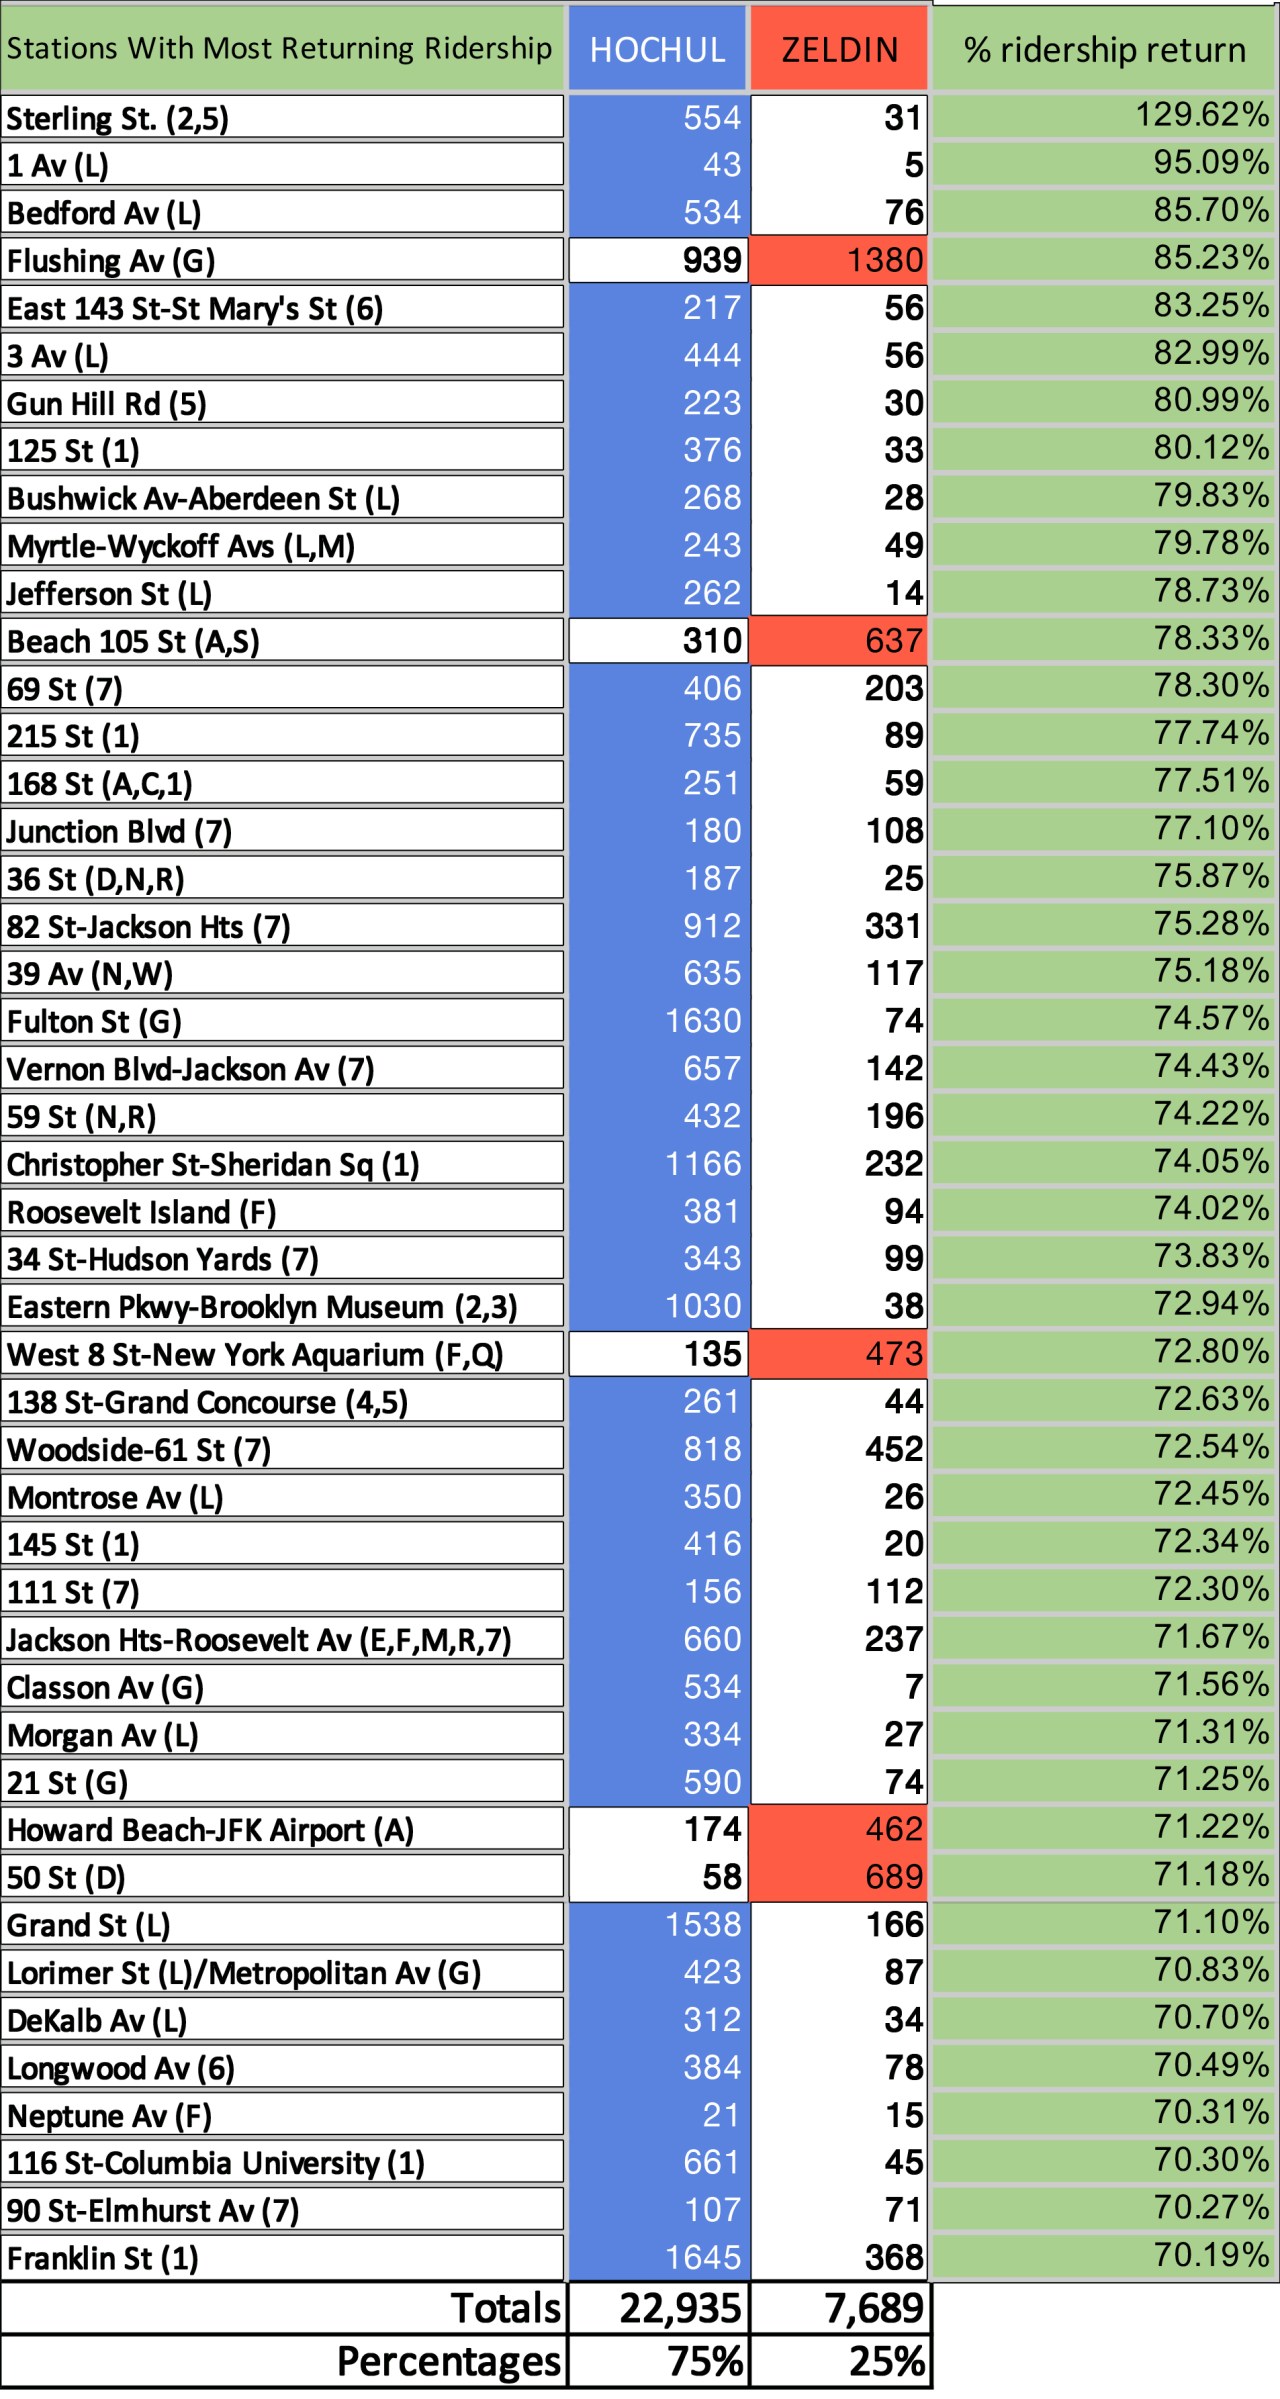 In the 46 election districts with the highest rate of return for subway riders, Hochul won 41. Note: Several stations were deleted because they were closed for part of 2019 and artificially reflected a high percentage surge in ridership.